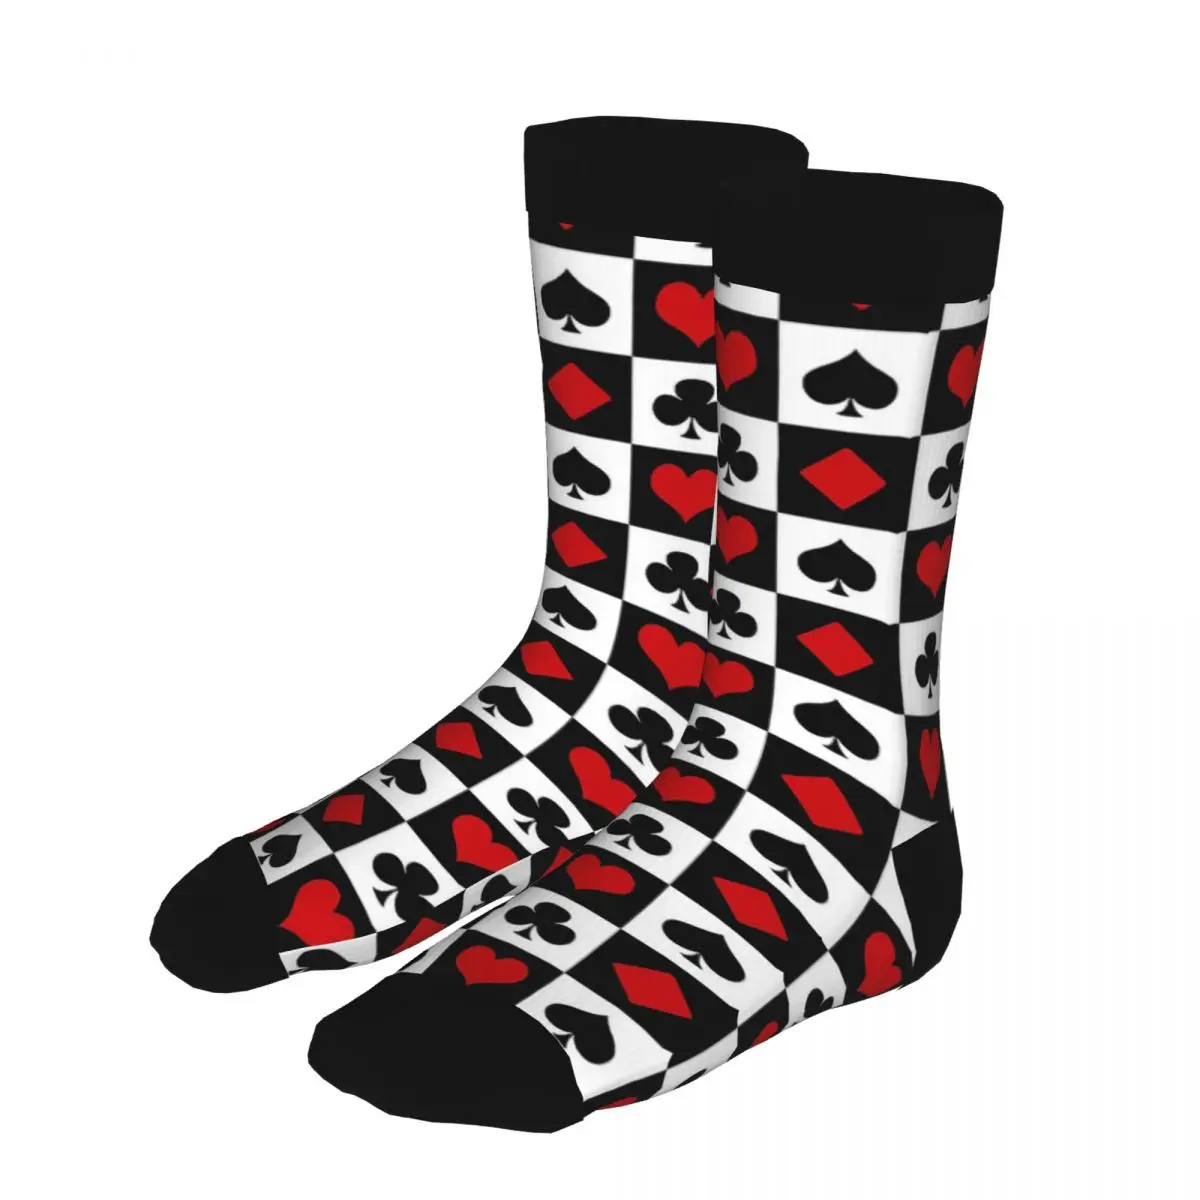 

Playing Card Thick Contrast Color Socks For Men 90% Polyester Funny Middle Tube Socks Crew Poker Betting Gambling Gift Idea